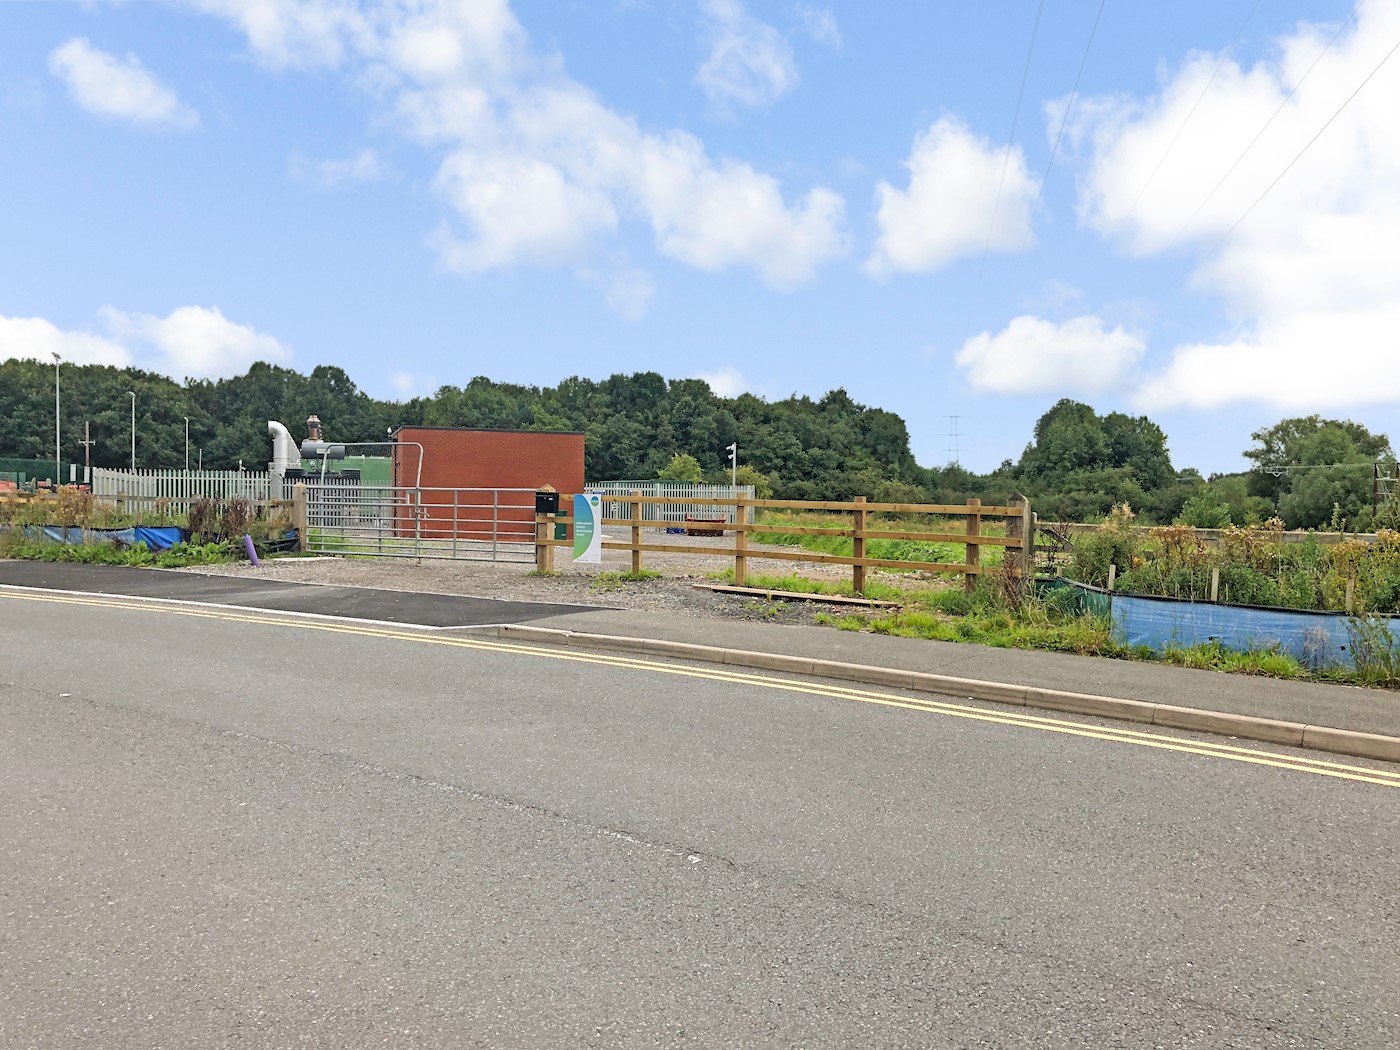 Land to north of ERF Way, Midpoint 18 Industrial Estate, Middlewich, CW10 0QJ 1/7